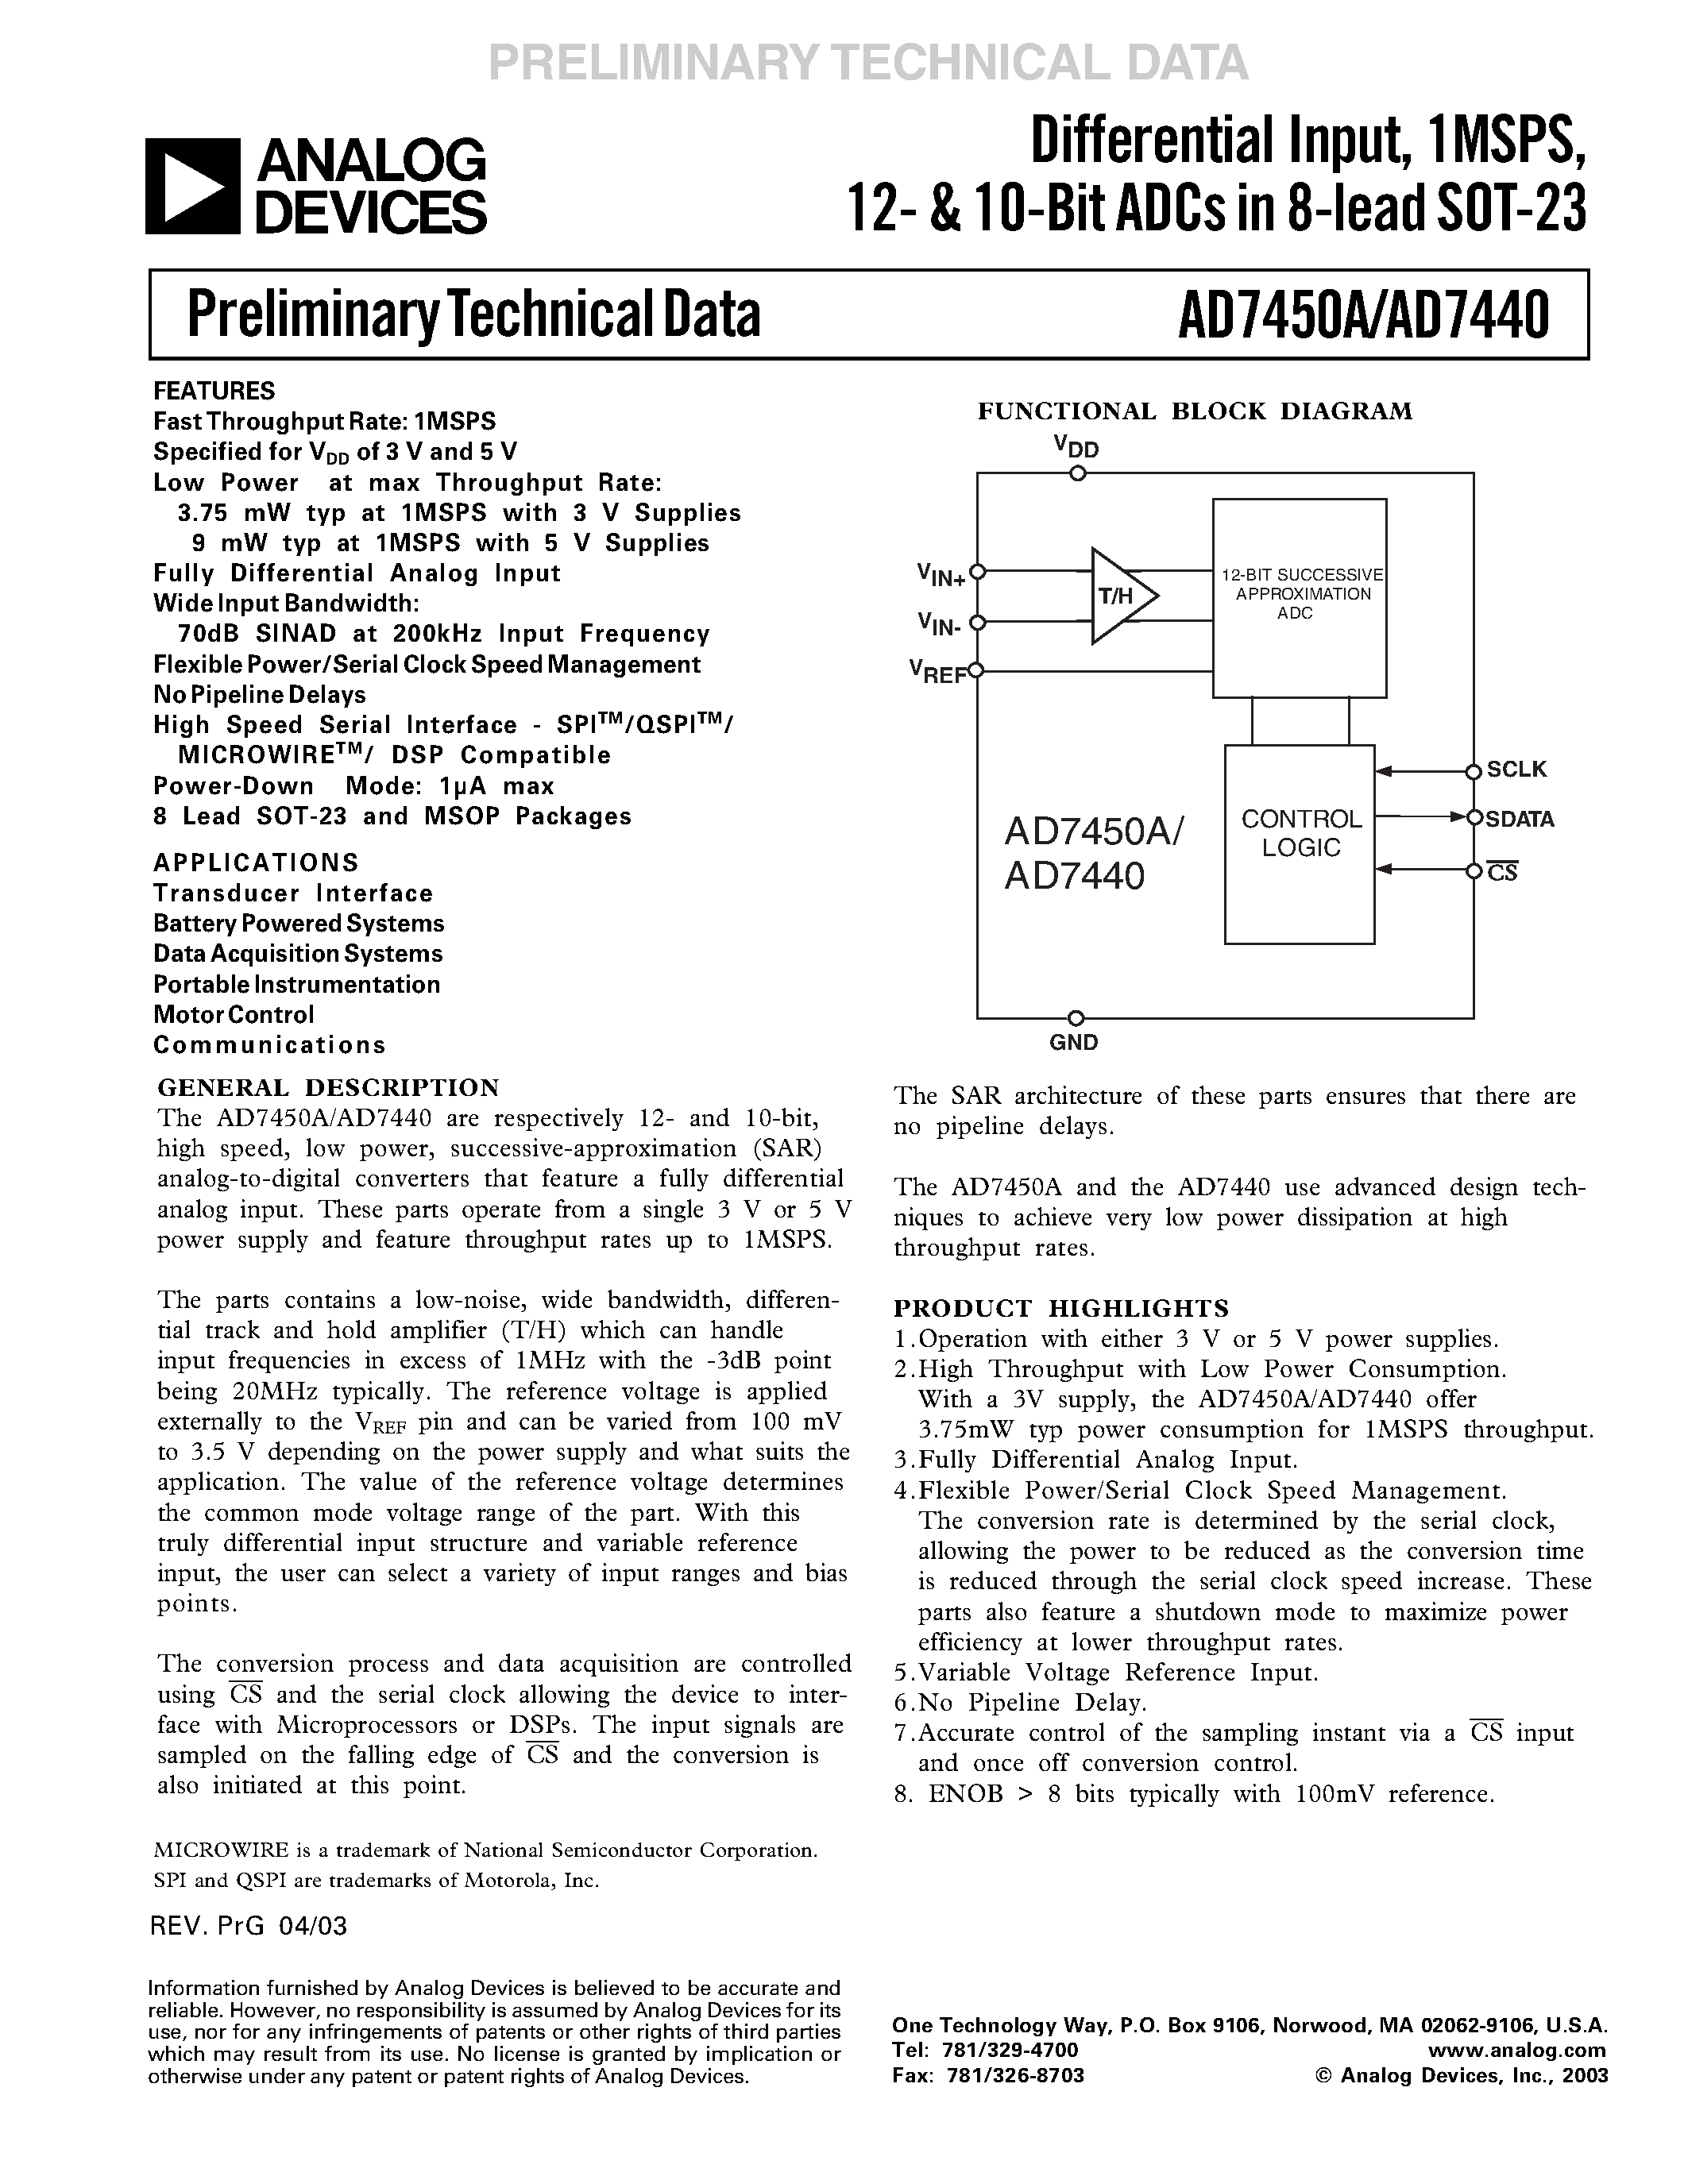 Datasheet AD7440 - (AD7440 / AD7450A) Differential Input / 1 MSPS 10-Bit and 12-Bit ADCs in an 8-Lead SOT-23 page 1